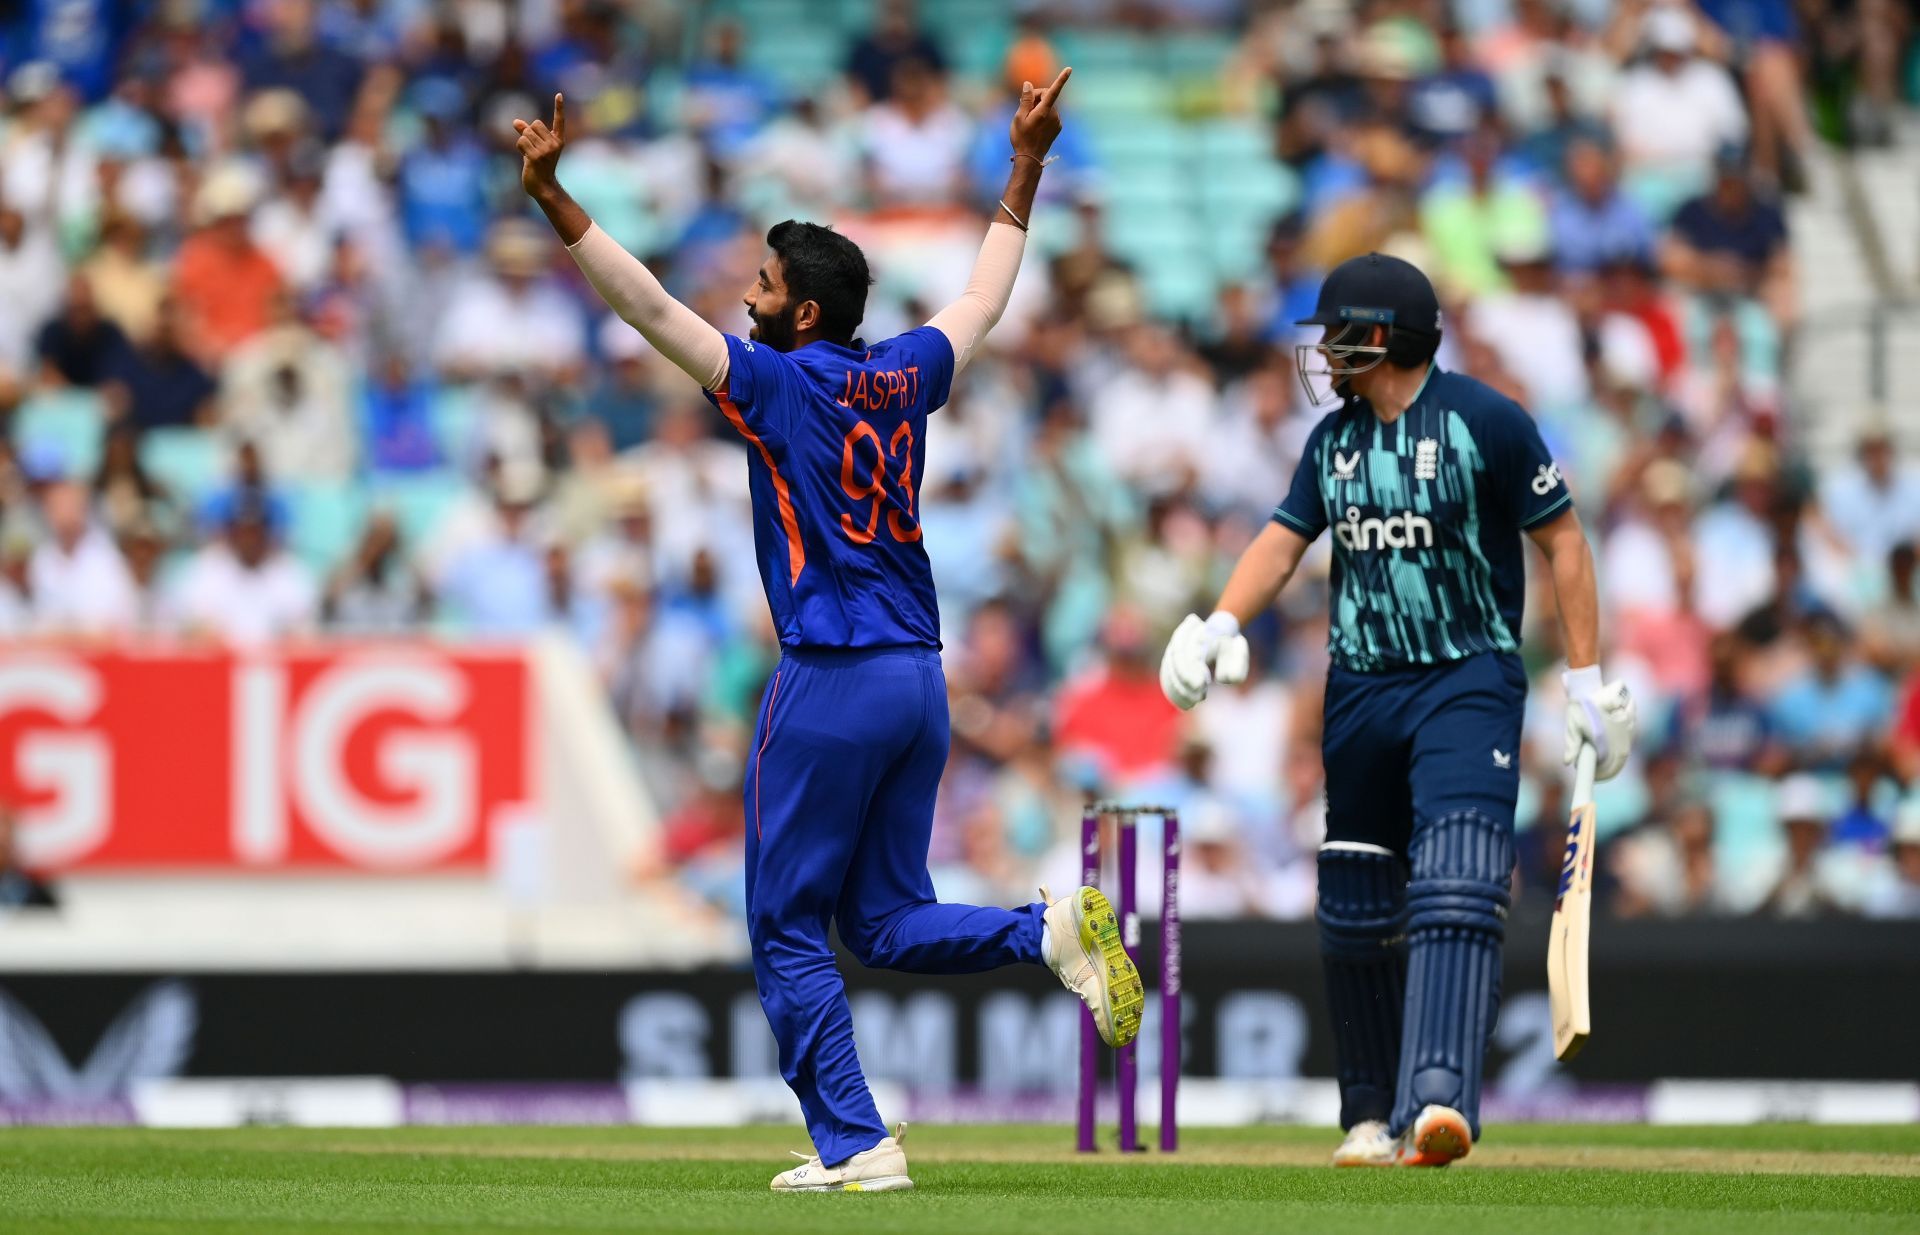 Jasprit Bumrah celebrates after picking up the wicket of Jonny Bairstow. (P.C.:Getty)